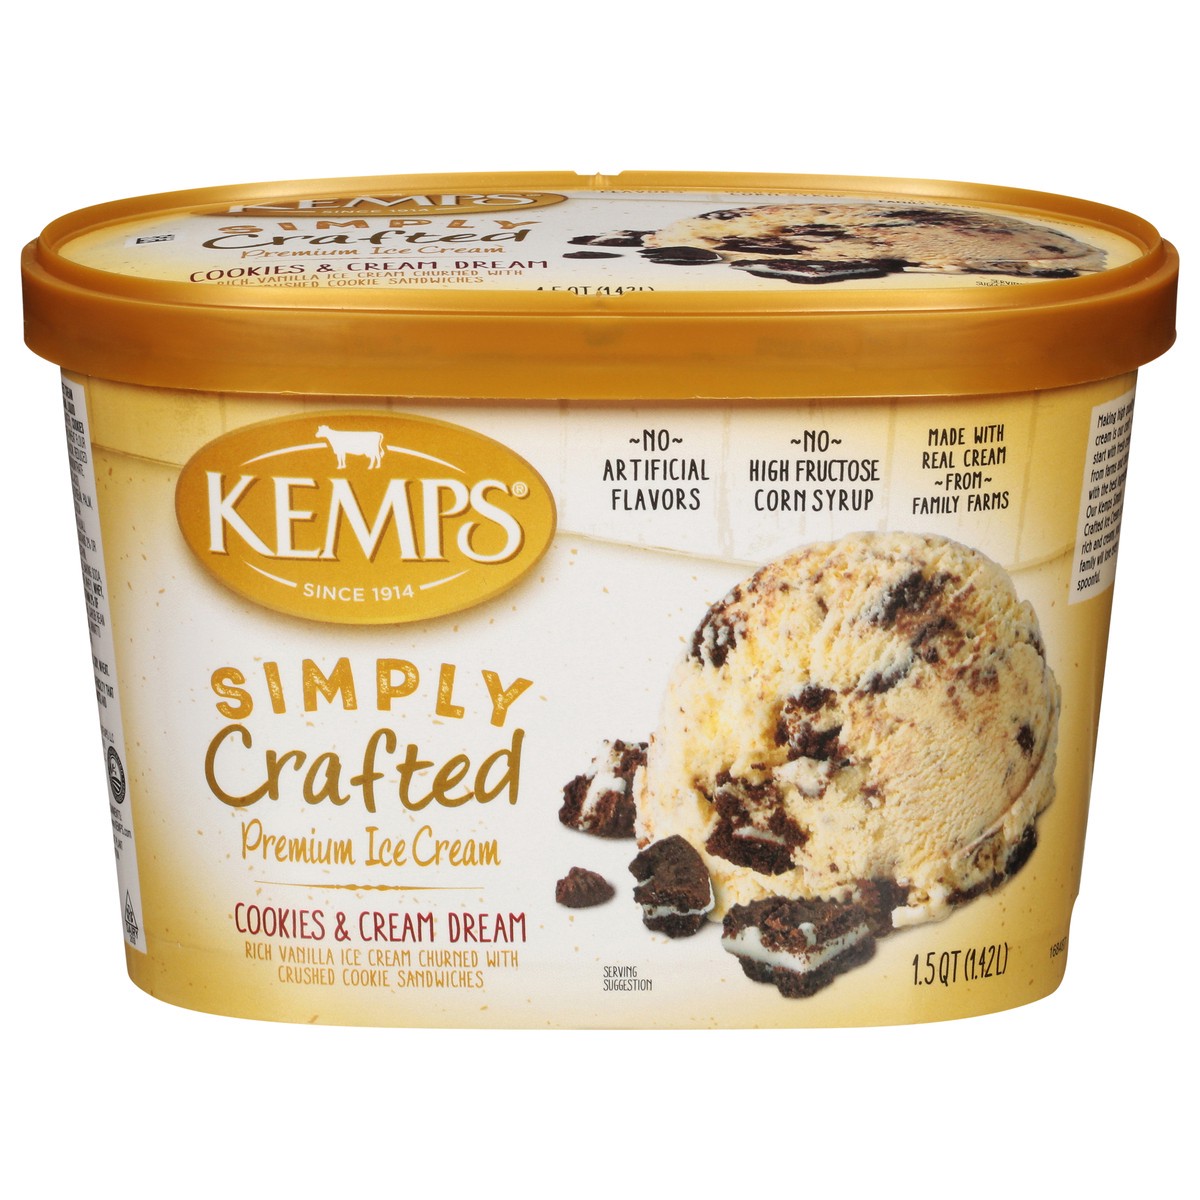 slide 1 of 9, Kemps Cookies & Creme Simply Crafted Ice Cream, 1.5 qt